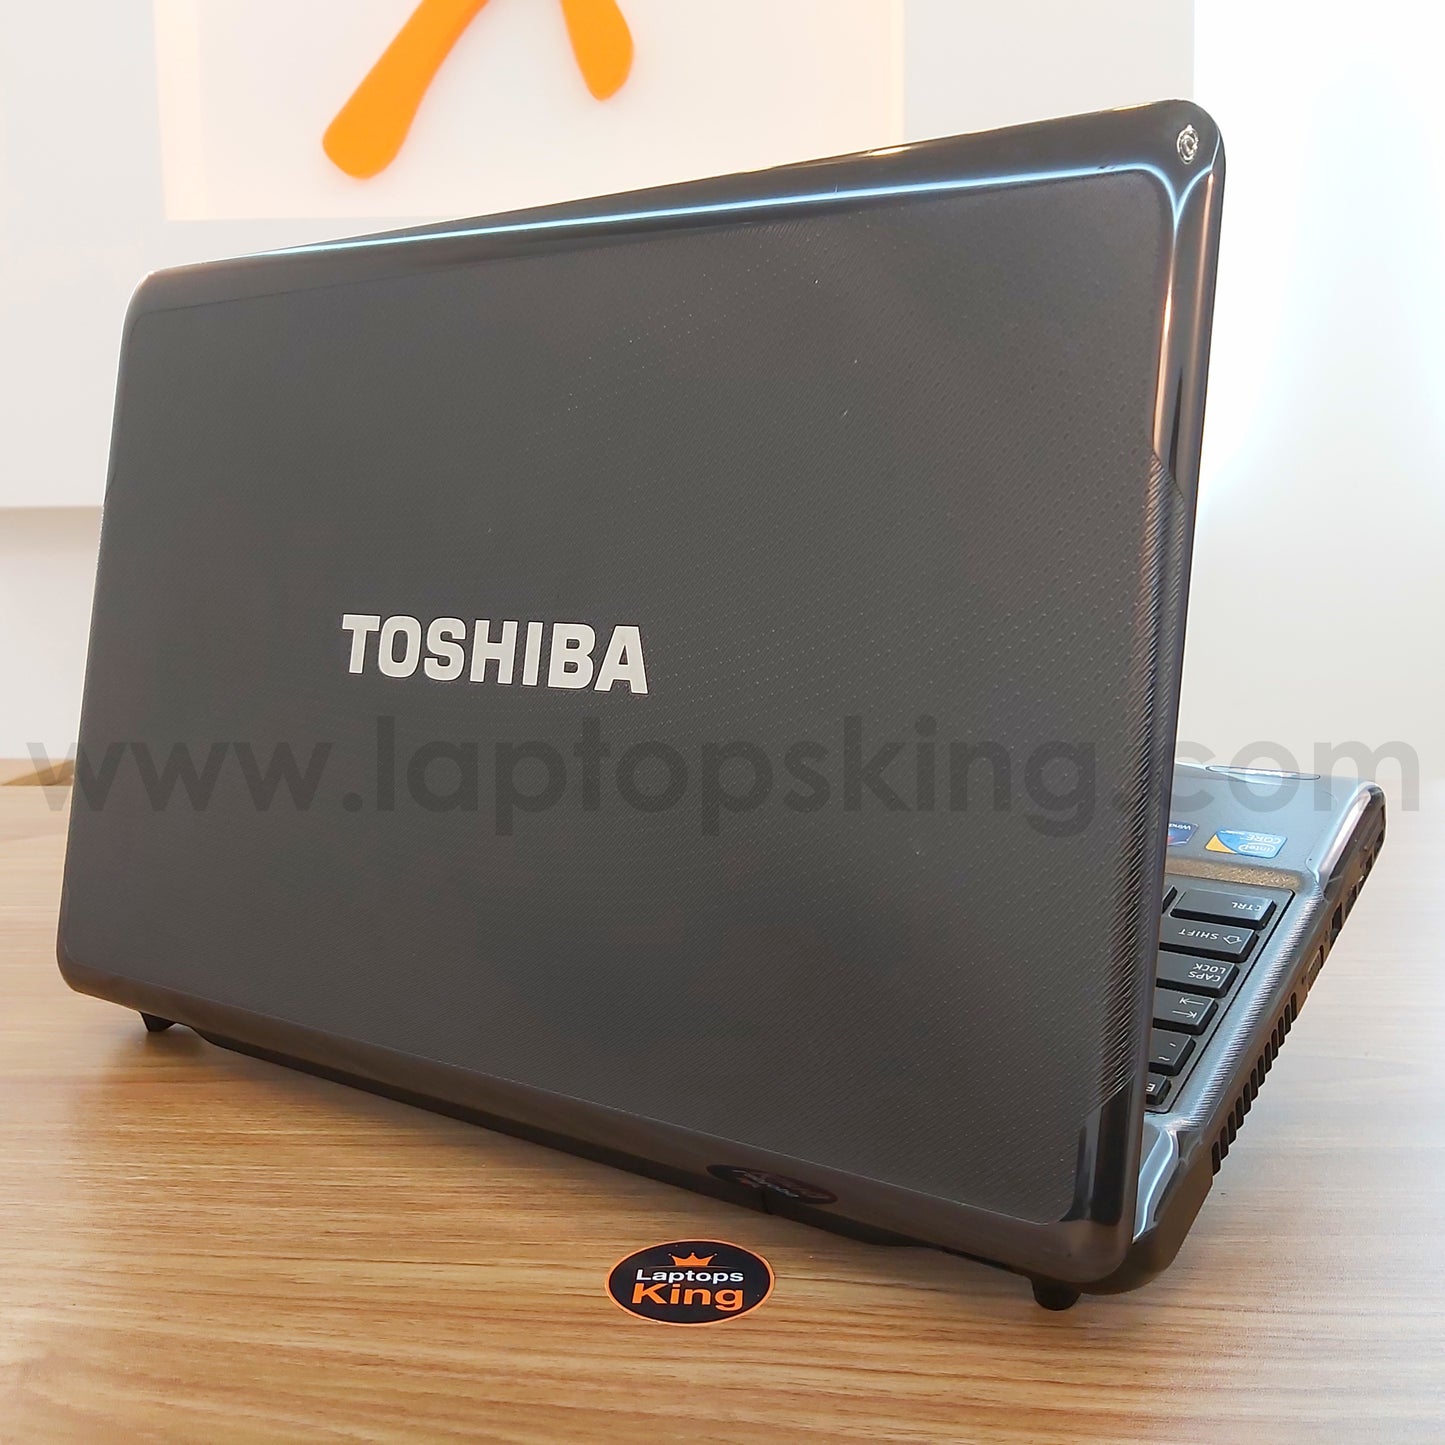 Toshiba Satellite A665 Core i3 Laptop (Used Very Clean)